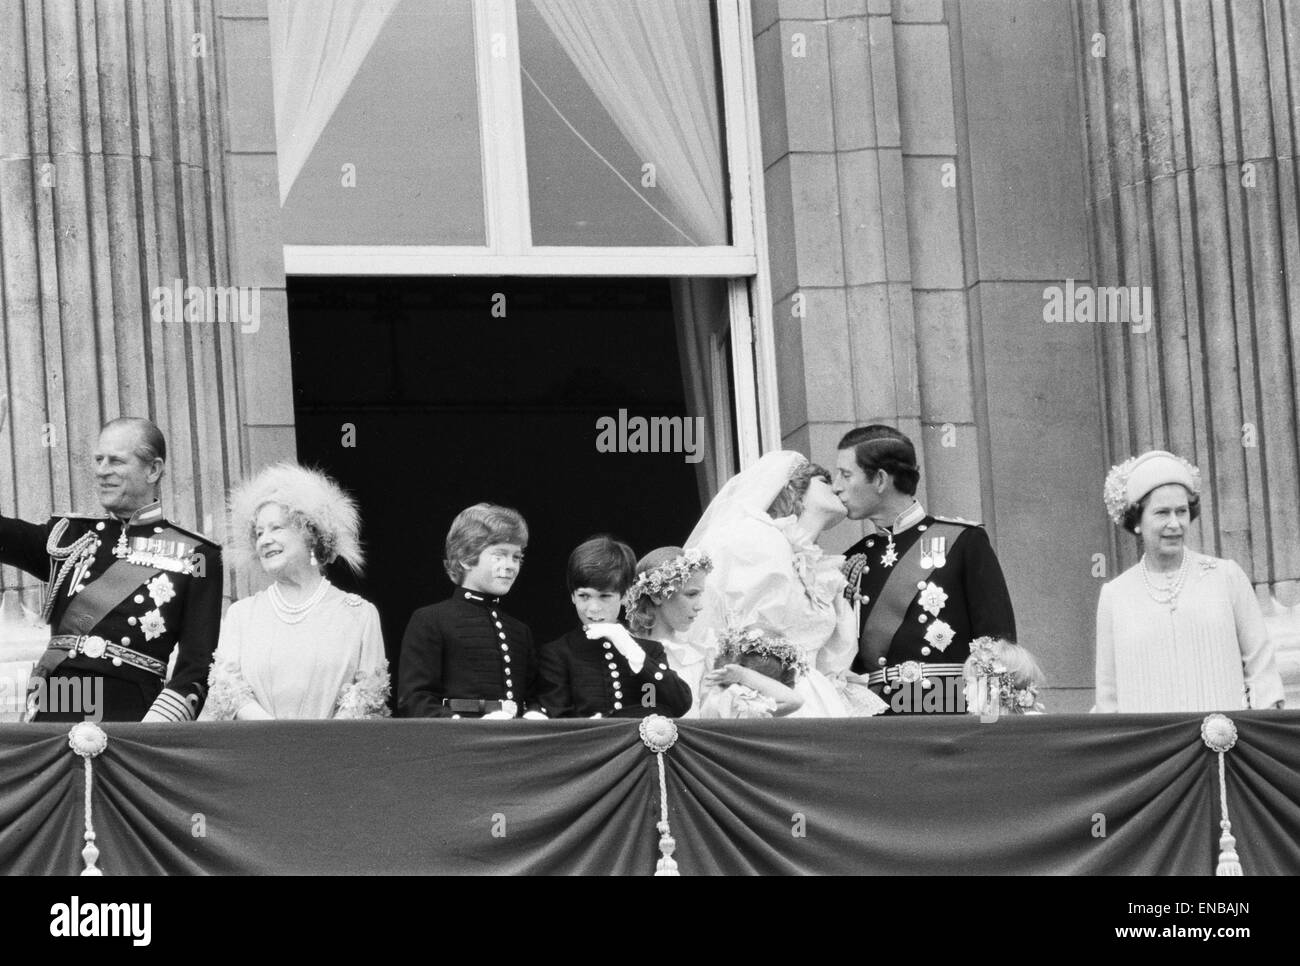 Prince Charles and Diana Spencer wedding, 29th July 1981. The happy couple share a kiss on the balcony at Buckingham Palace, joined by Prince Philip the Duke of Edinburgh, the Queen Mother, Queen Elizabeth II and some of the page boys and bridesmaids. Stock Photo